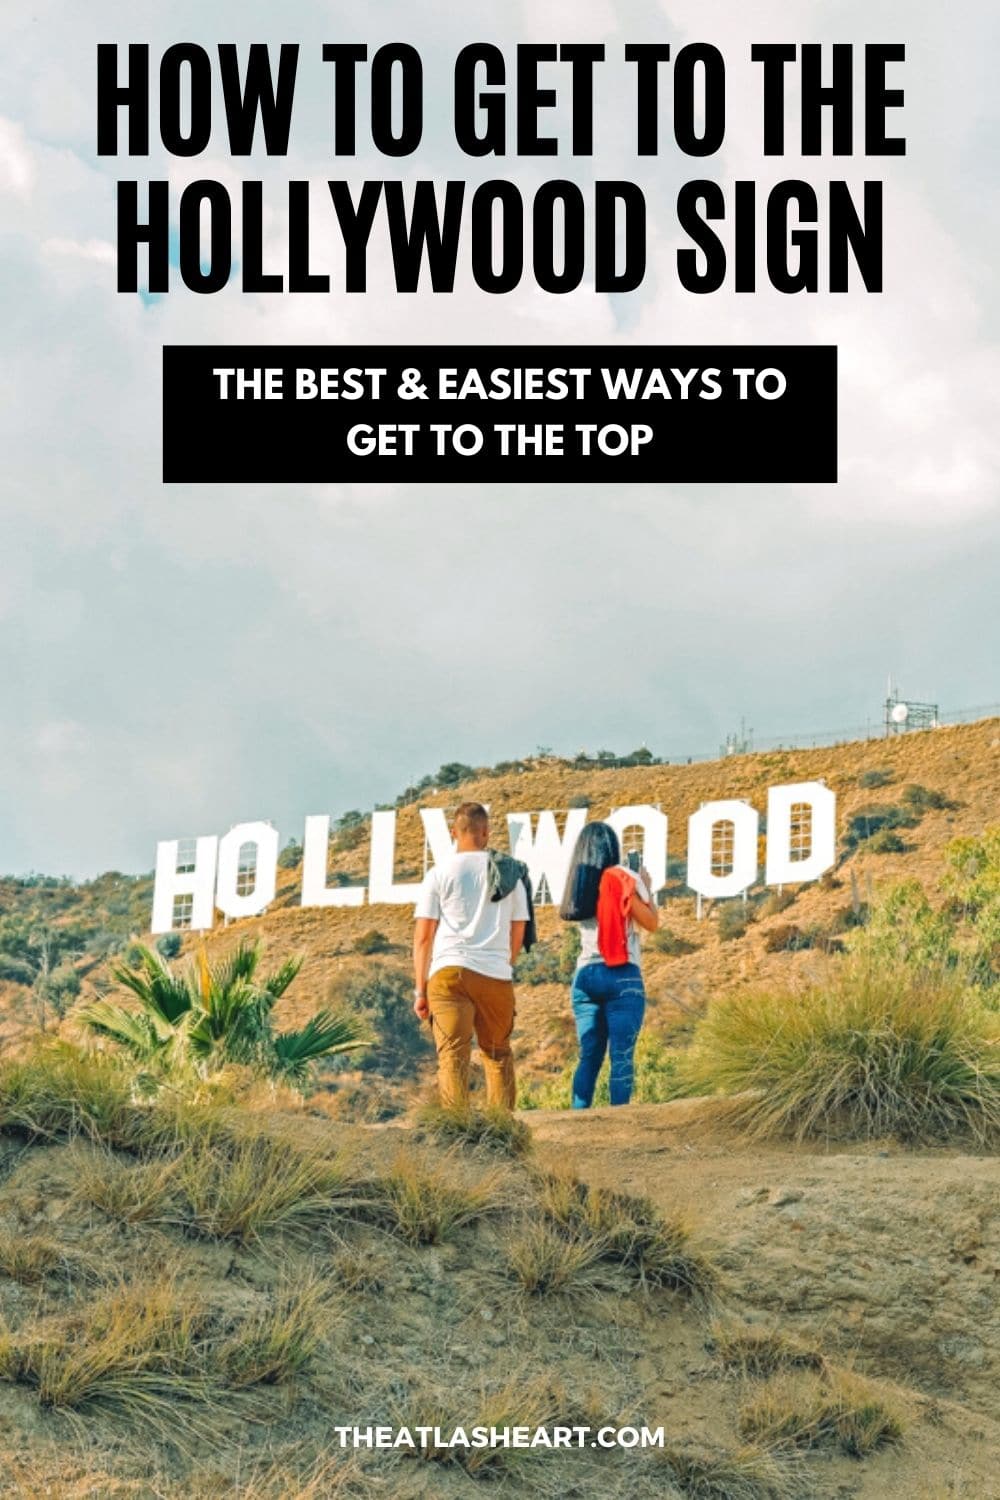 How to get to the Hollywood Sign [The Best & Easiest Ways to Get to the Top]